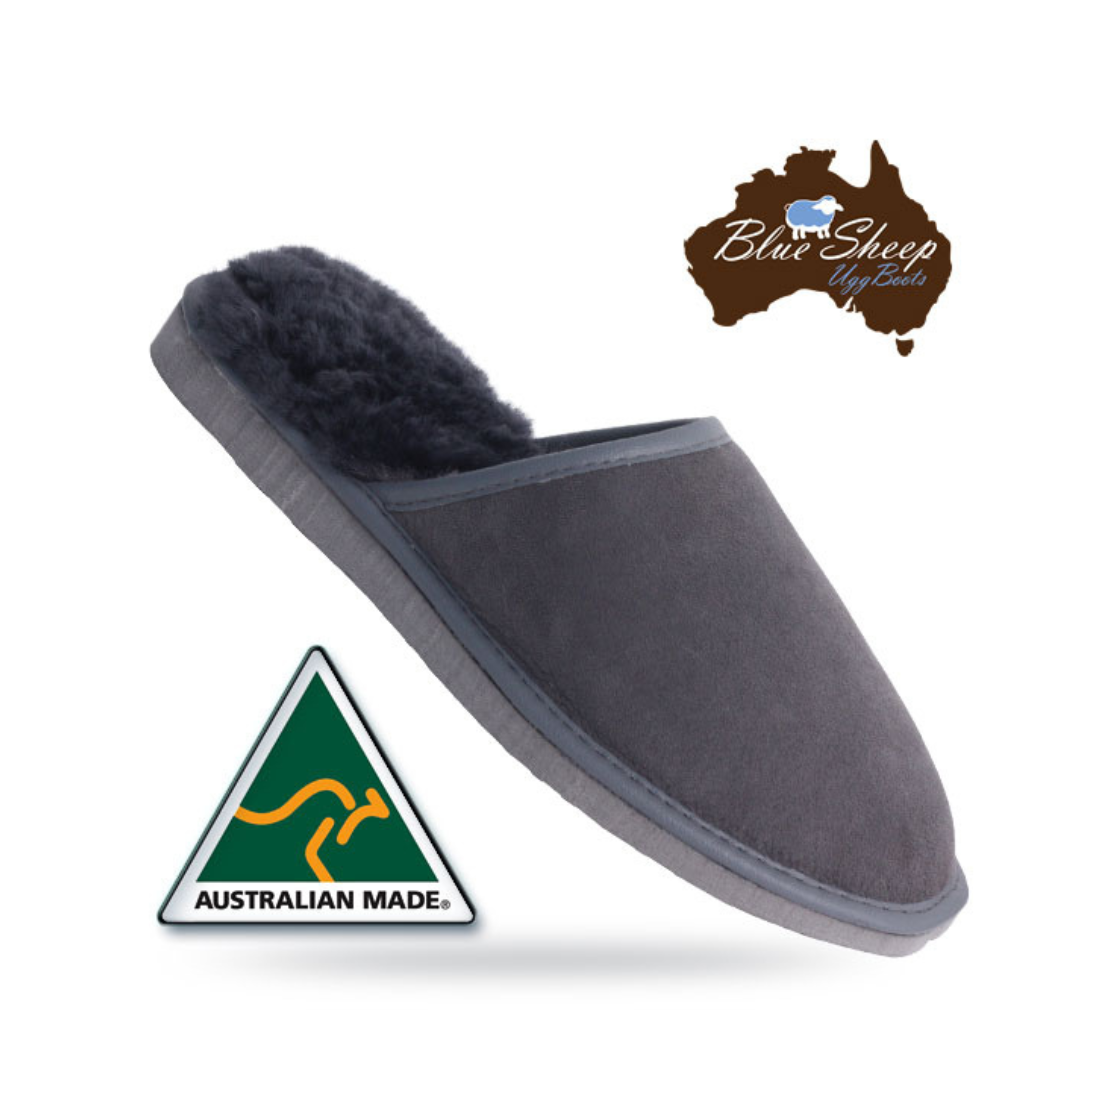 Shop Ugg Boots | Blue Sheep Scuff Slippers in McLaren Vale, South Australia, 30 minutes south of Adelaide. Made in Australia